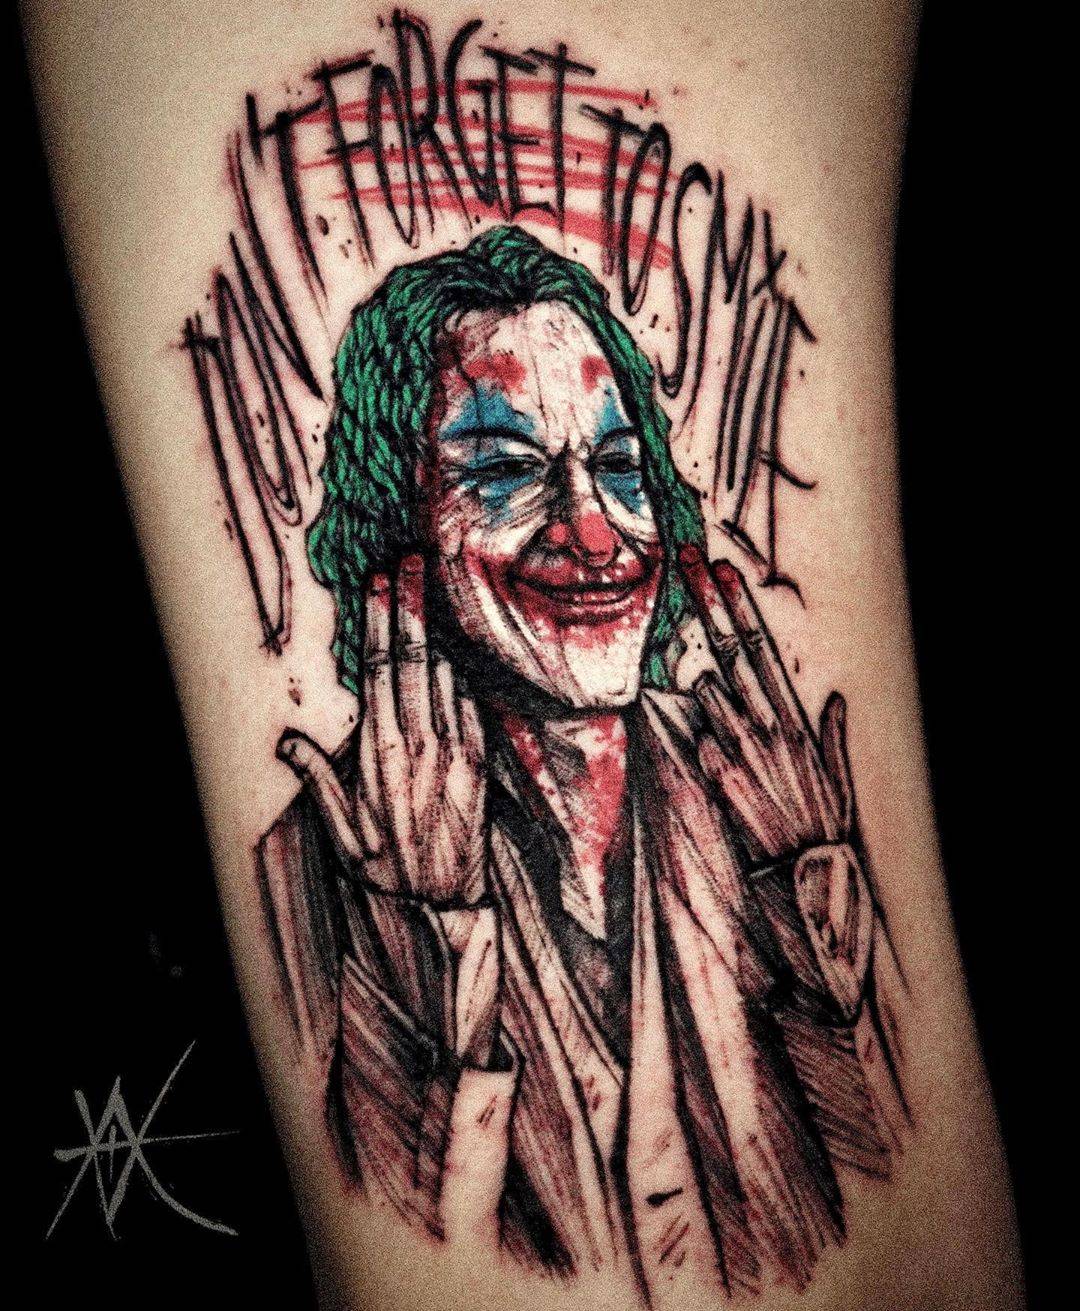 Halo Grey on Instagram Tattoo I got to do a while ago of this Joker tattoo  Easily smallest face I ever did jokertattoo joker joaquinphoenix  realismart